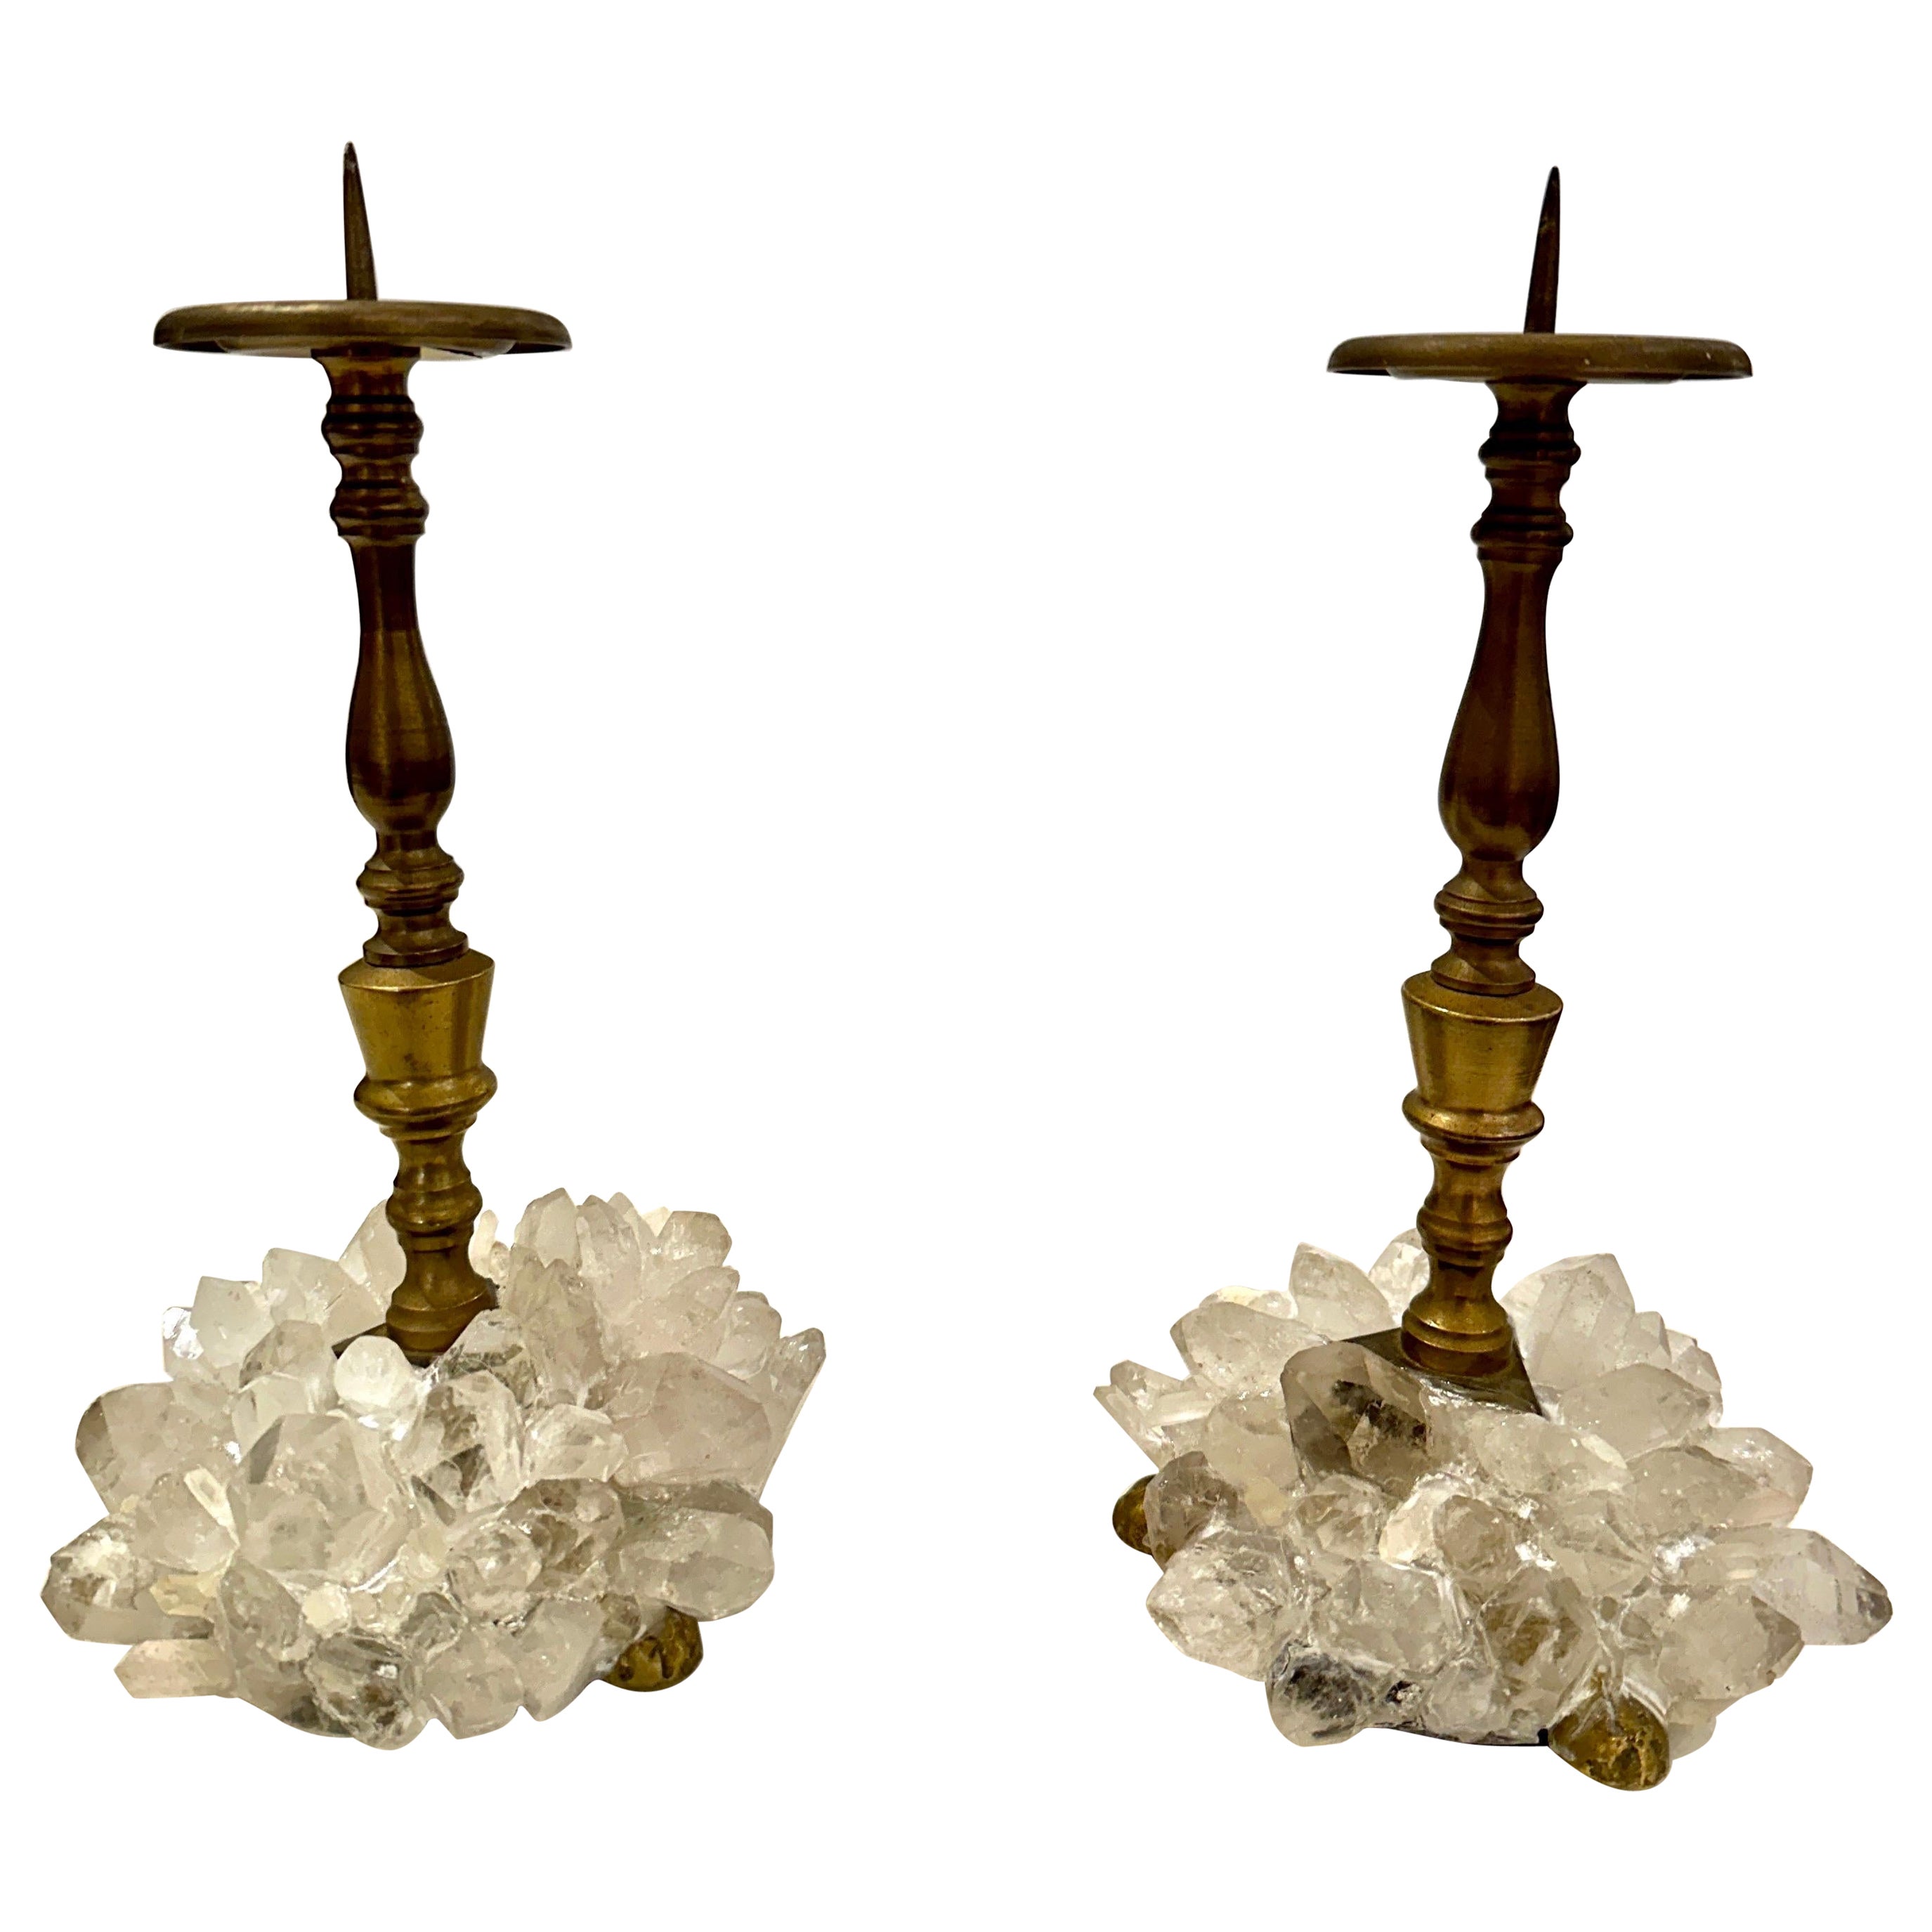 Early 20th C. Charming Pair of Bronze Candleholders w/ Rock Crystals